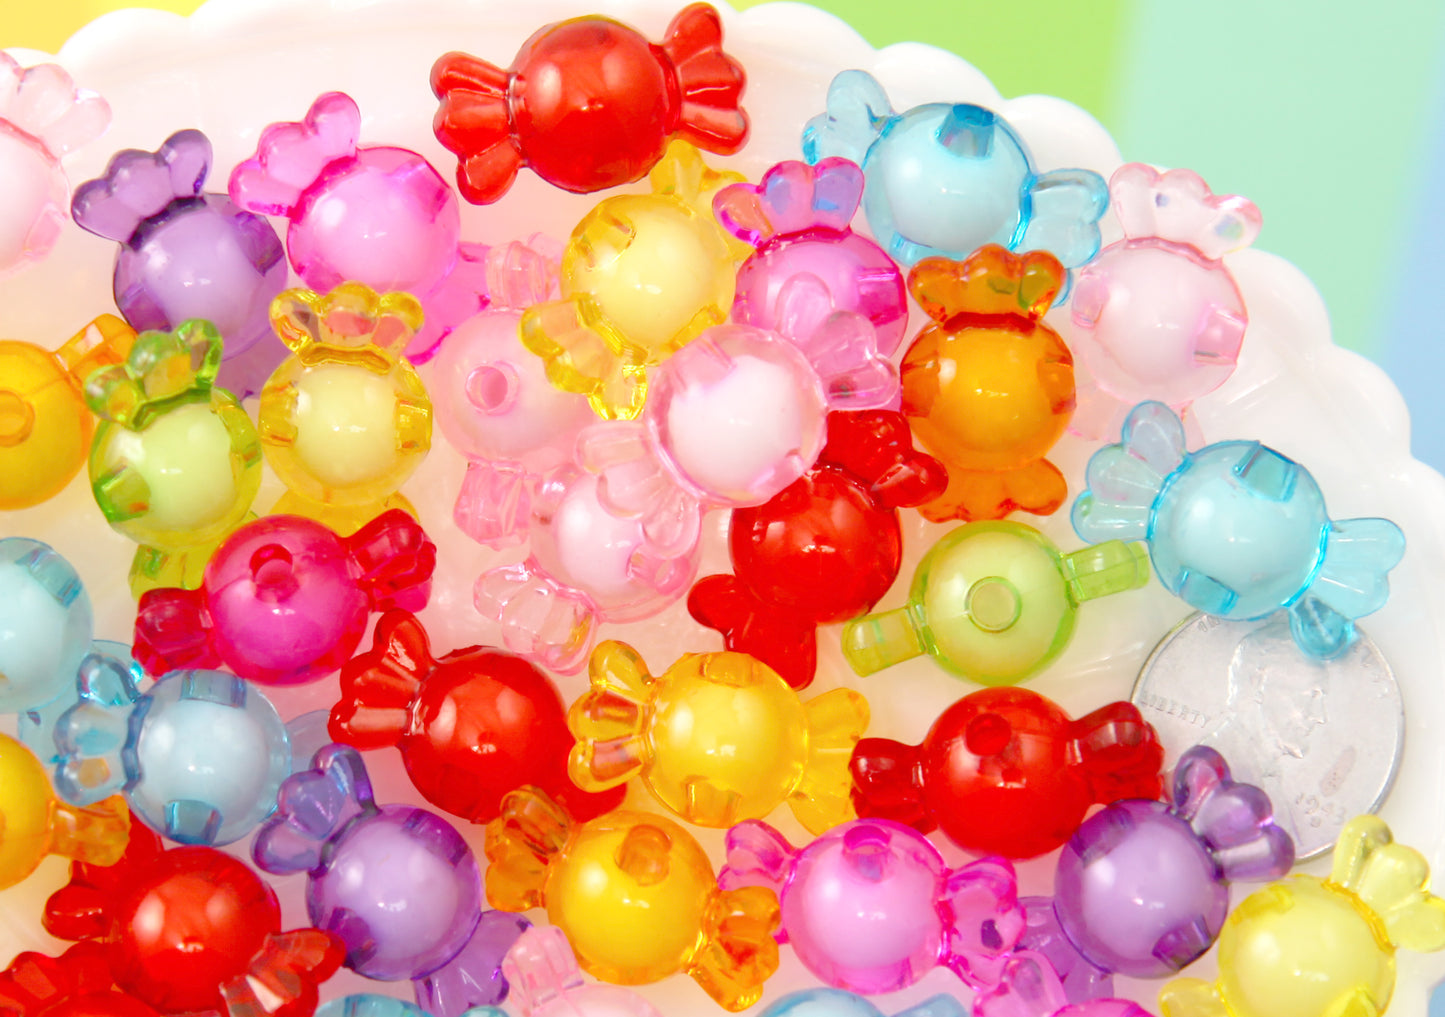 Candy Beads - 22mm Small Candy Shape Acrylic or Resin Beads - 30 pc set